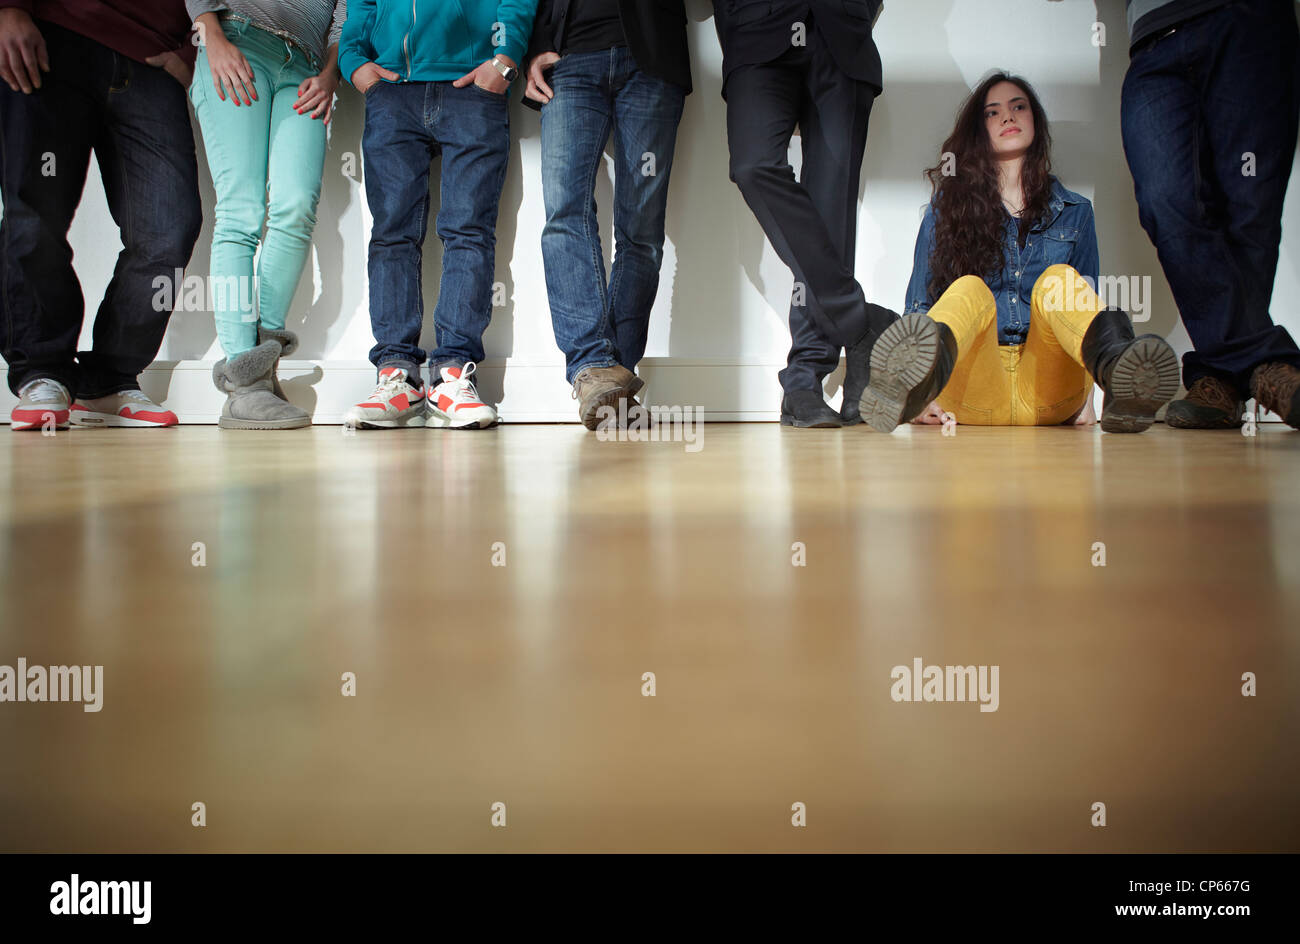 Germany, Cologne, Men and women standing and sitting on floor Stock Photo